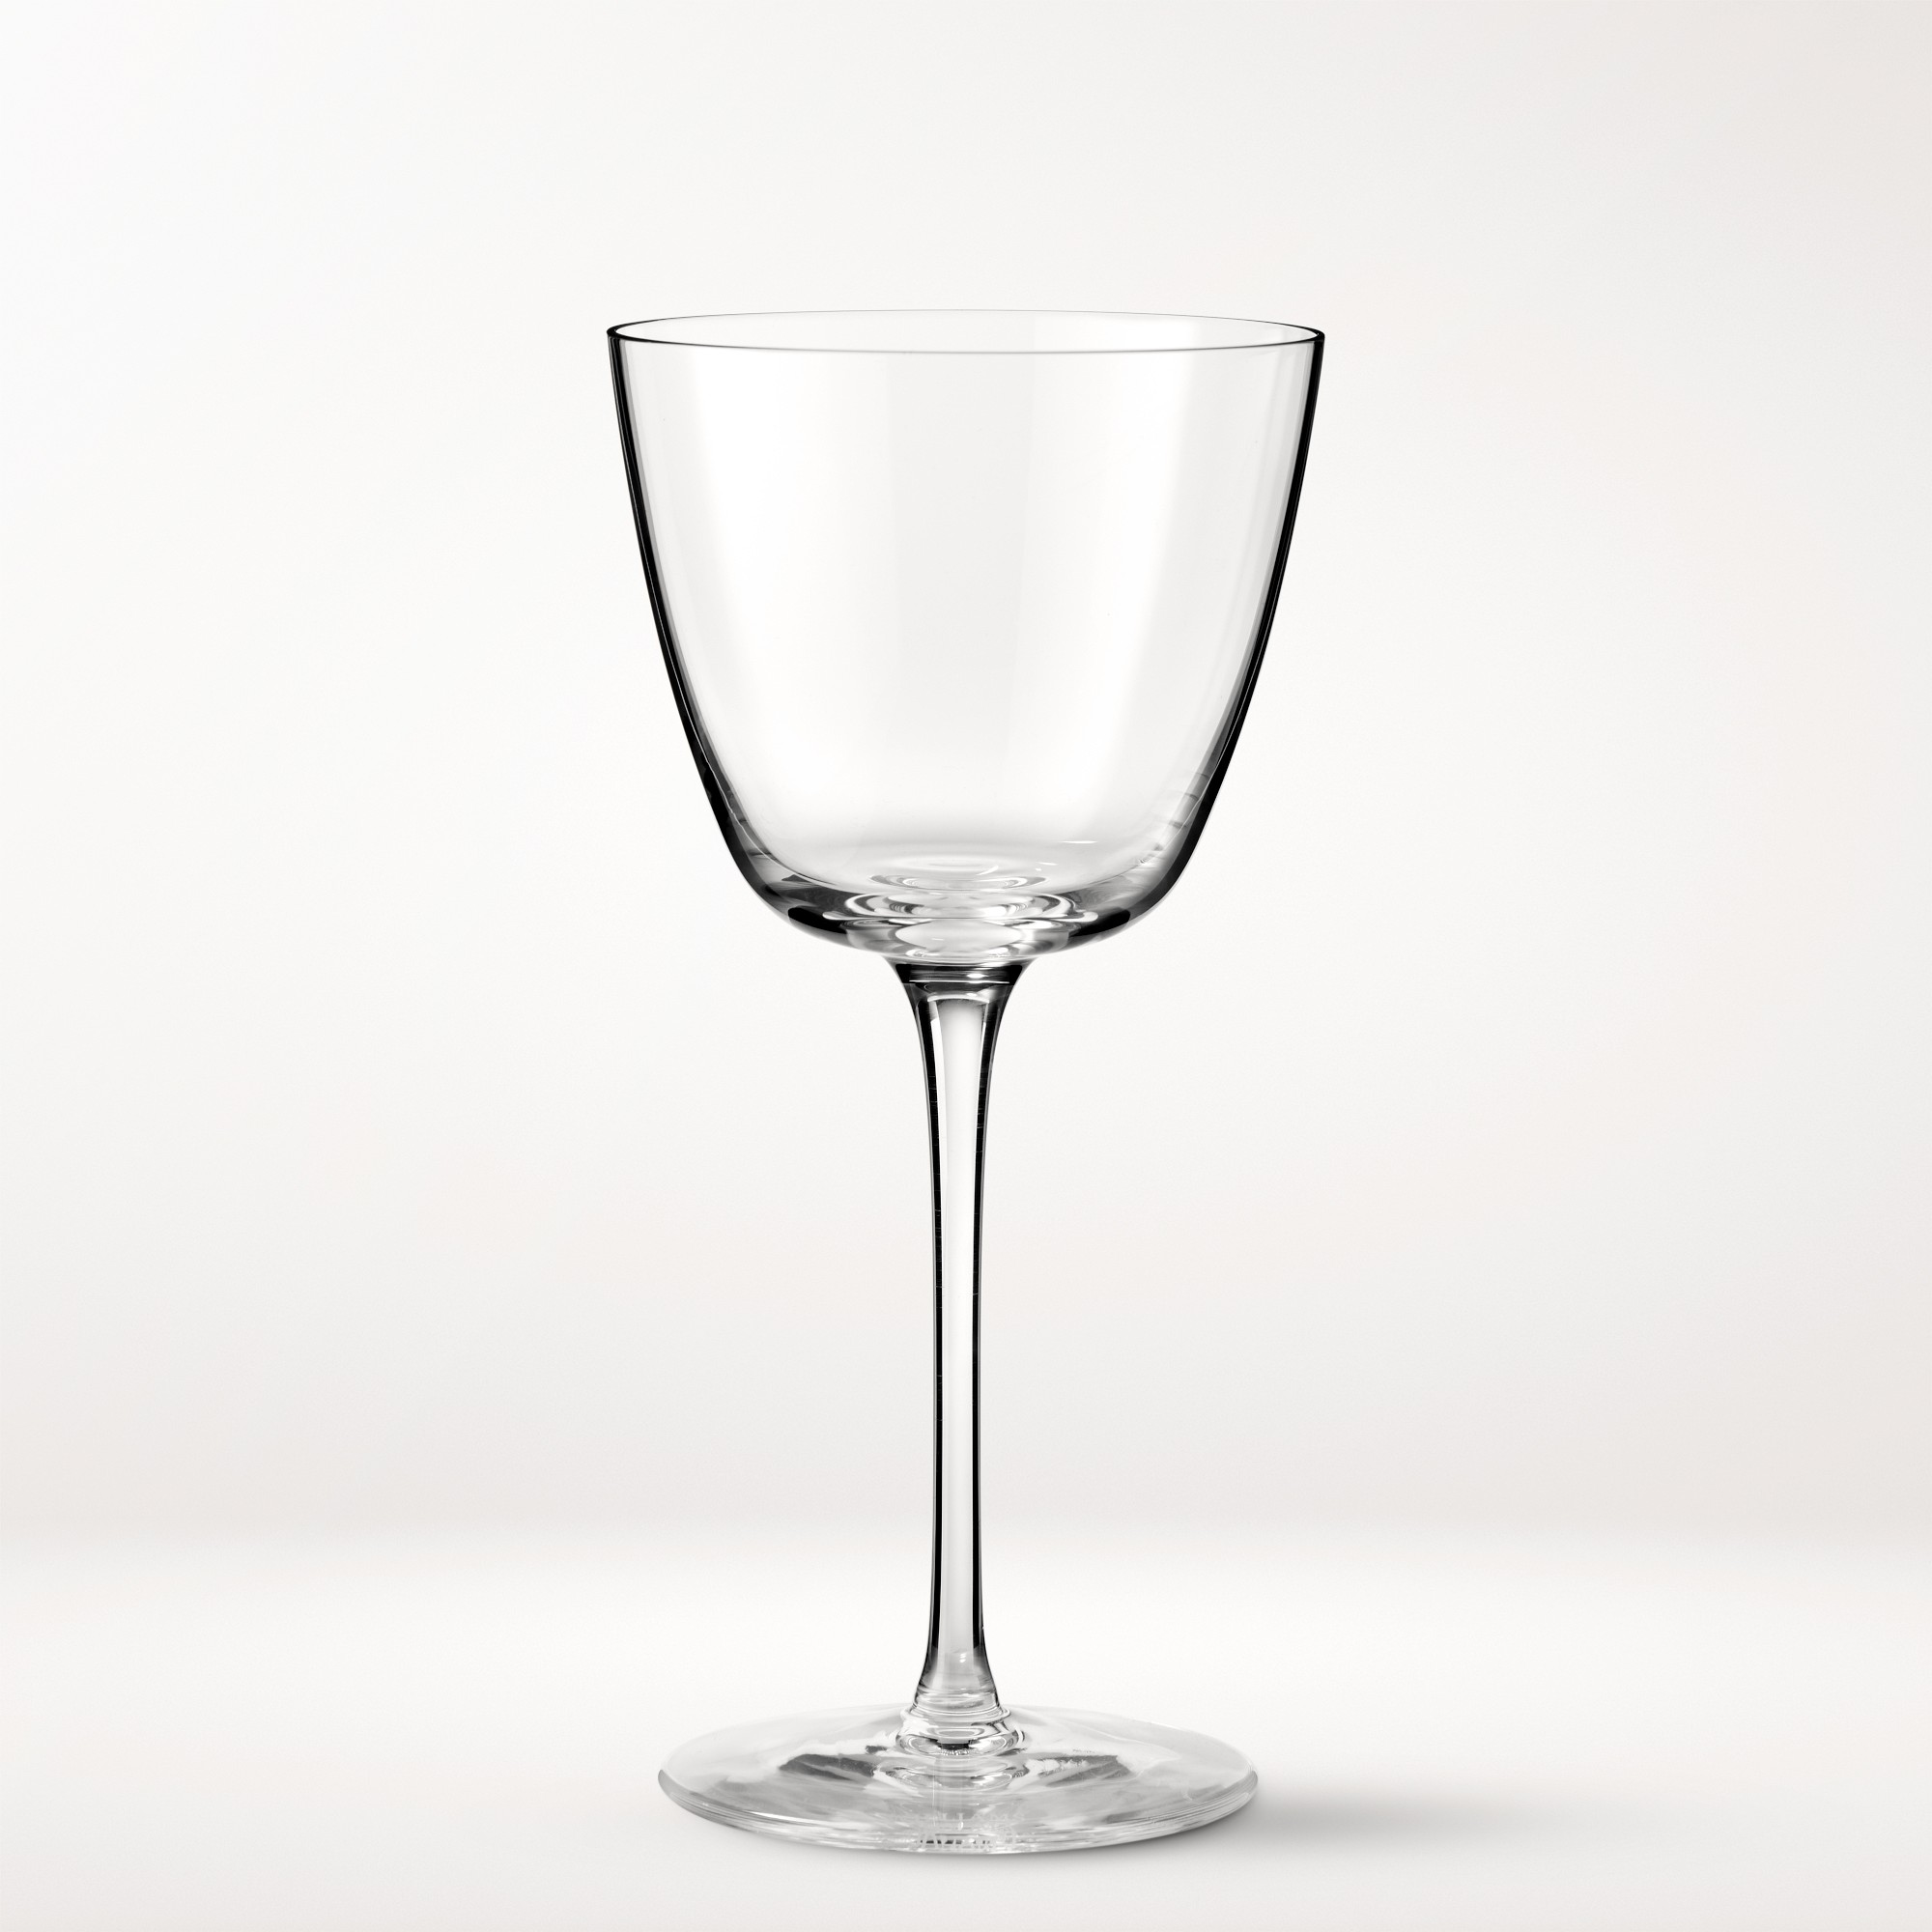 Williams Sonoma Reserve Nick and Nora Glasses, Set of 4